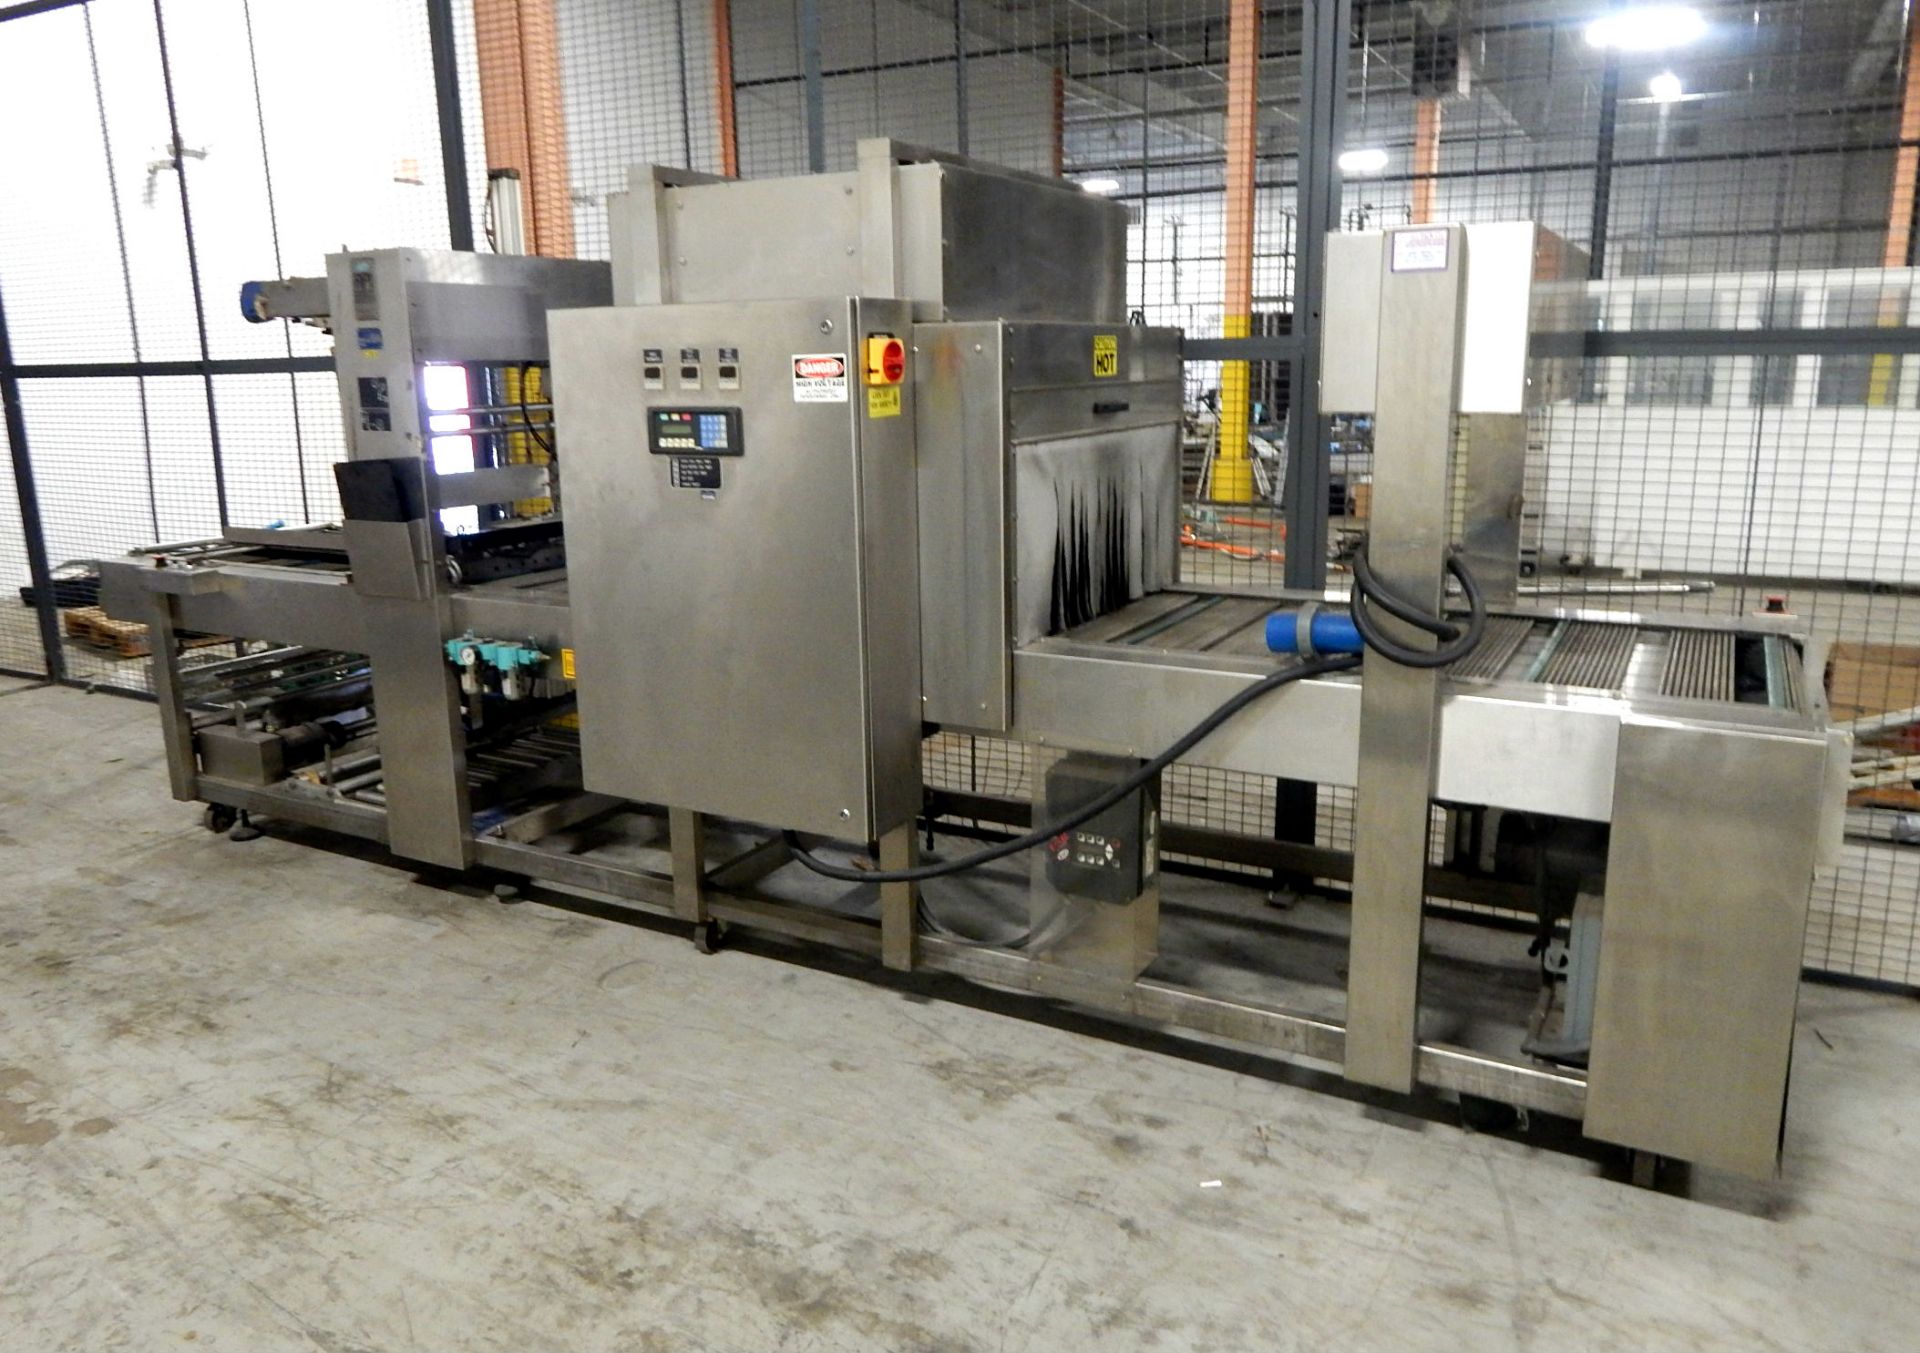 AUTOMATIC ALL STAINLESS STEEL CASE/TRAY OVERWRAPPER BY AUTOMATION PACKAGING INC.